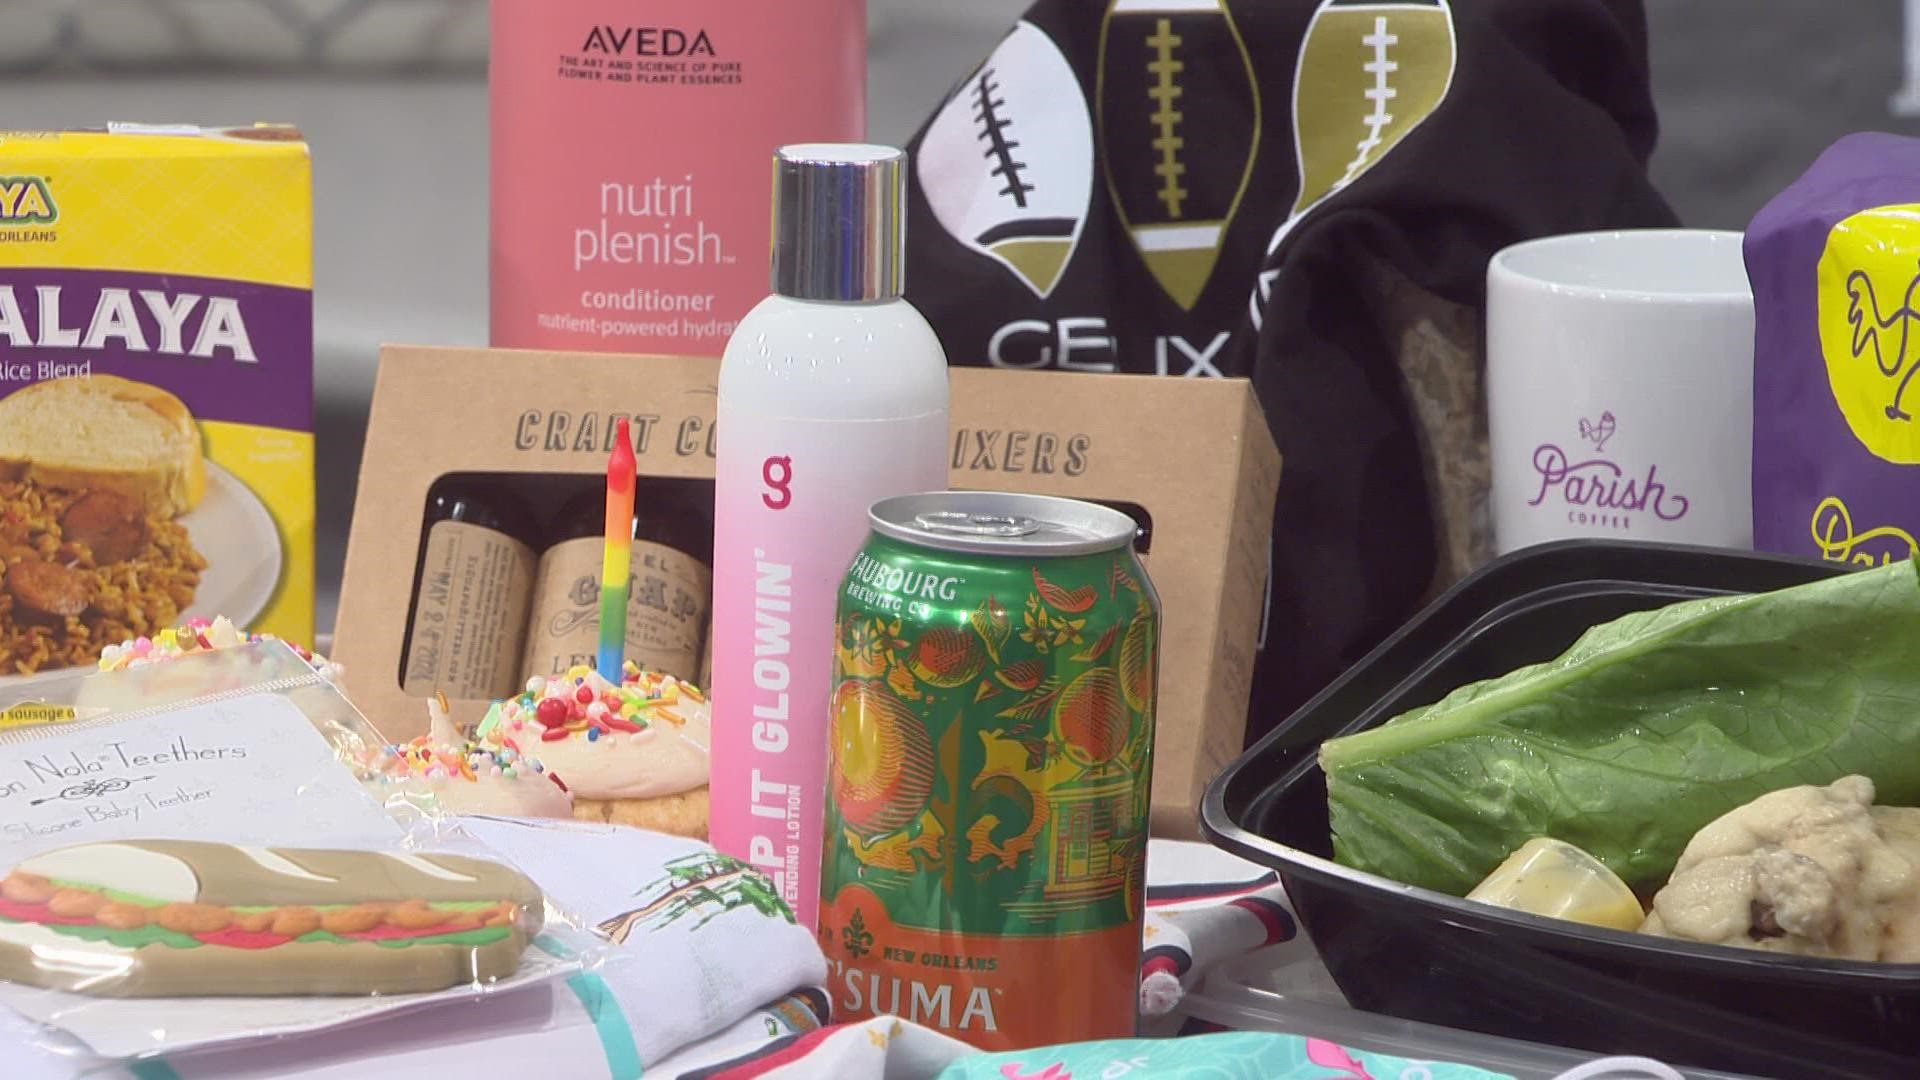 The New Orleans Mom will have giveaways featuring local businesses beginning August 8th to celebrate its anniversary.